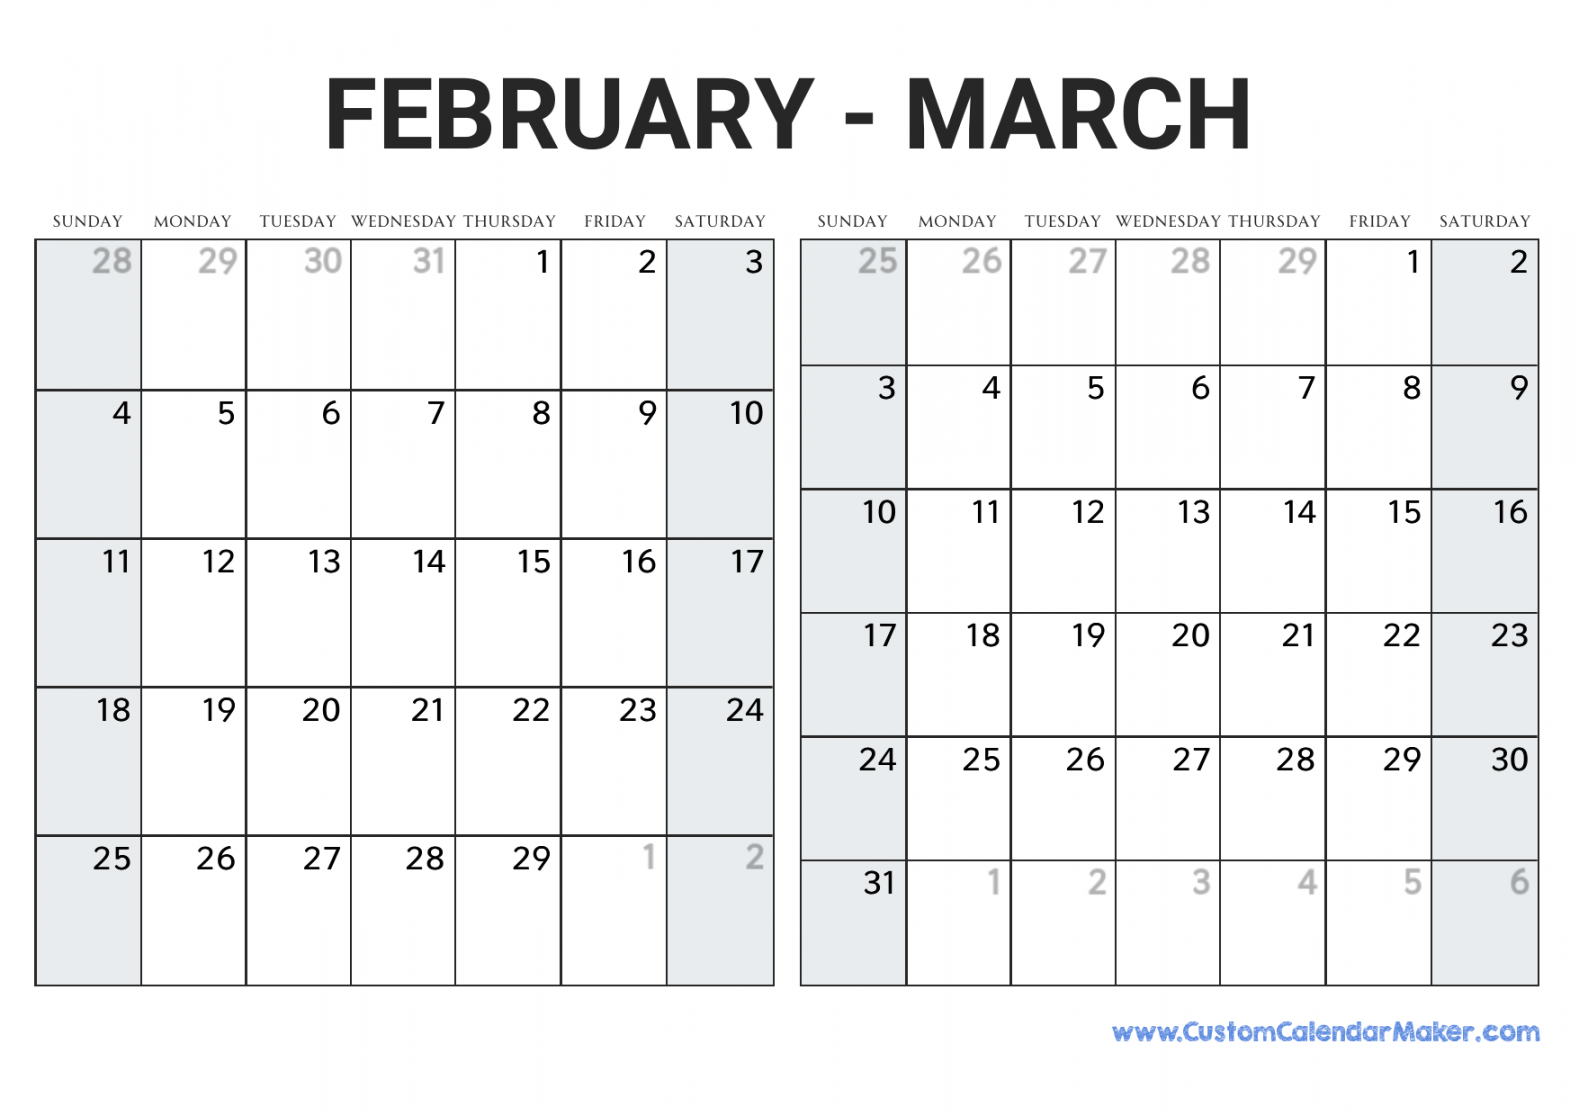 February and March Calendar